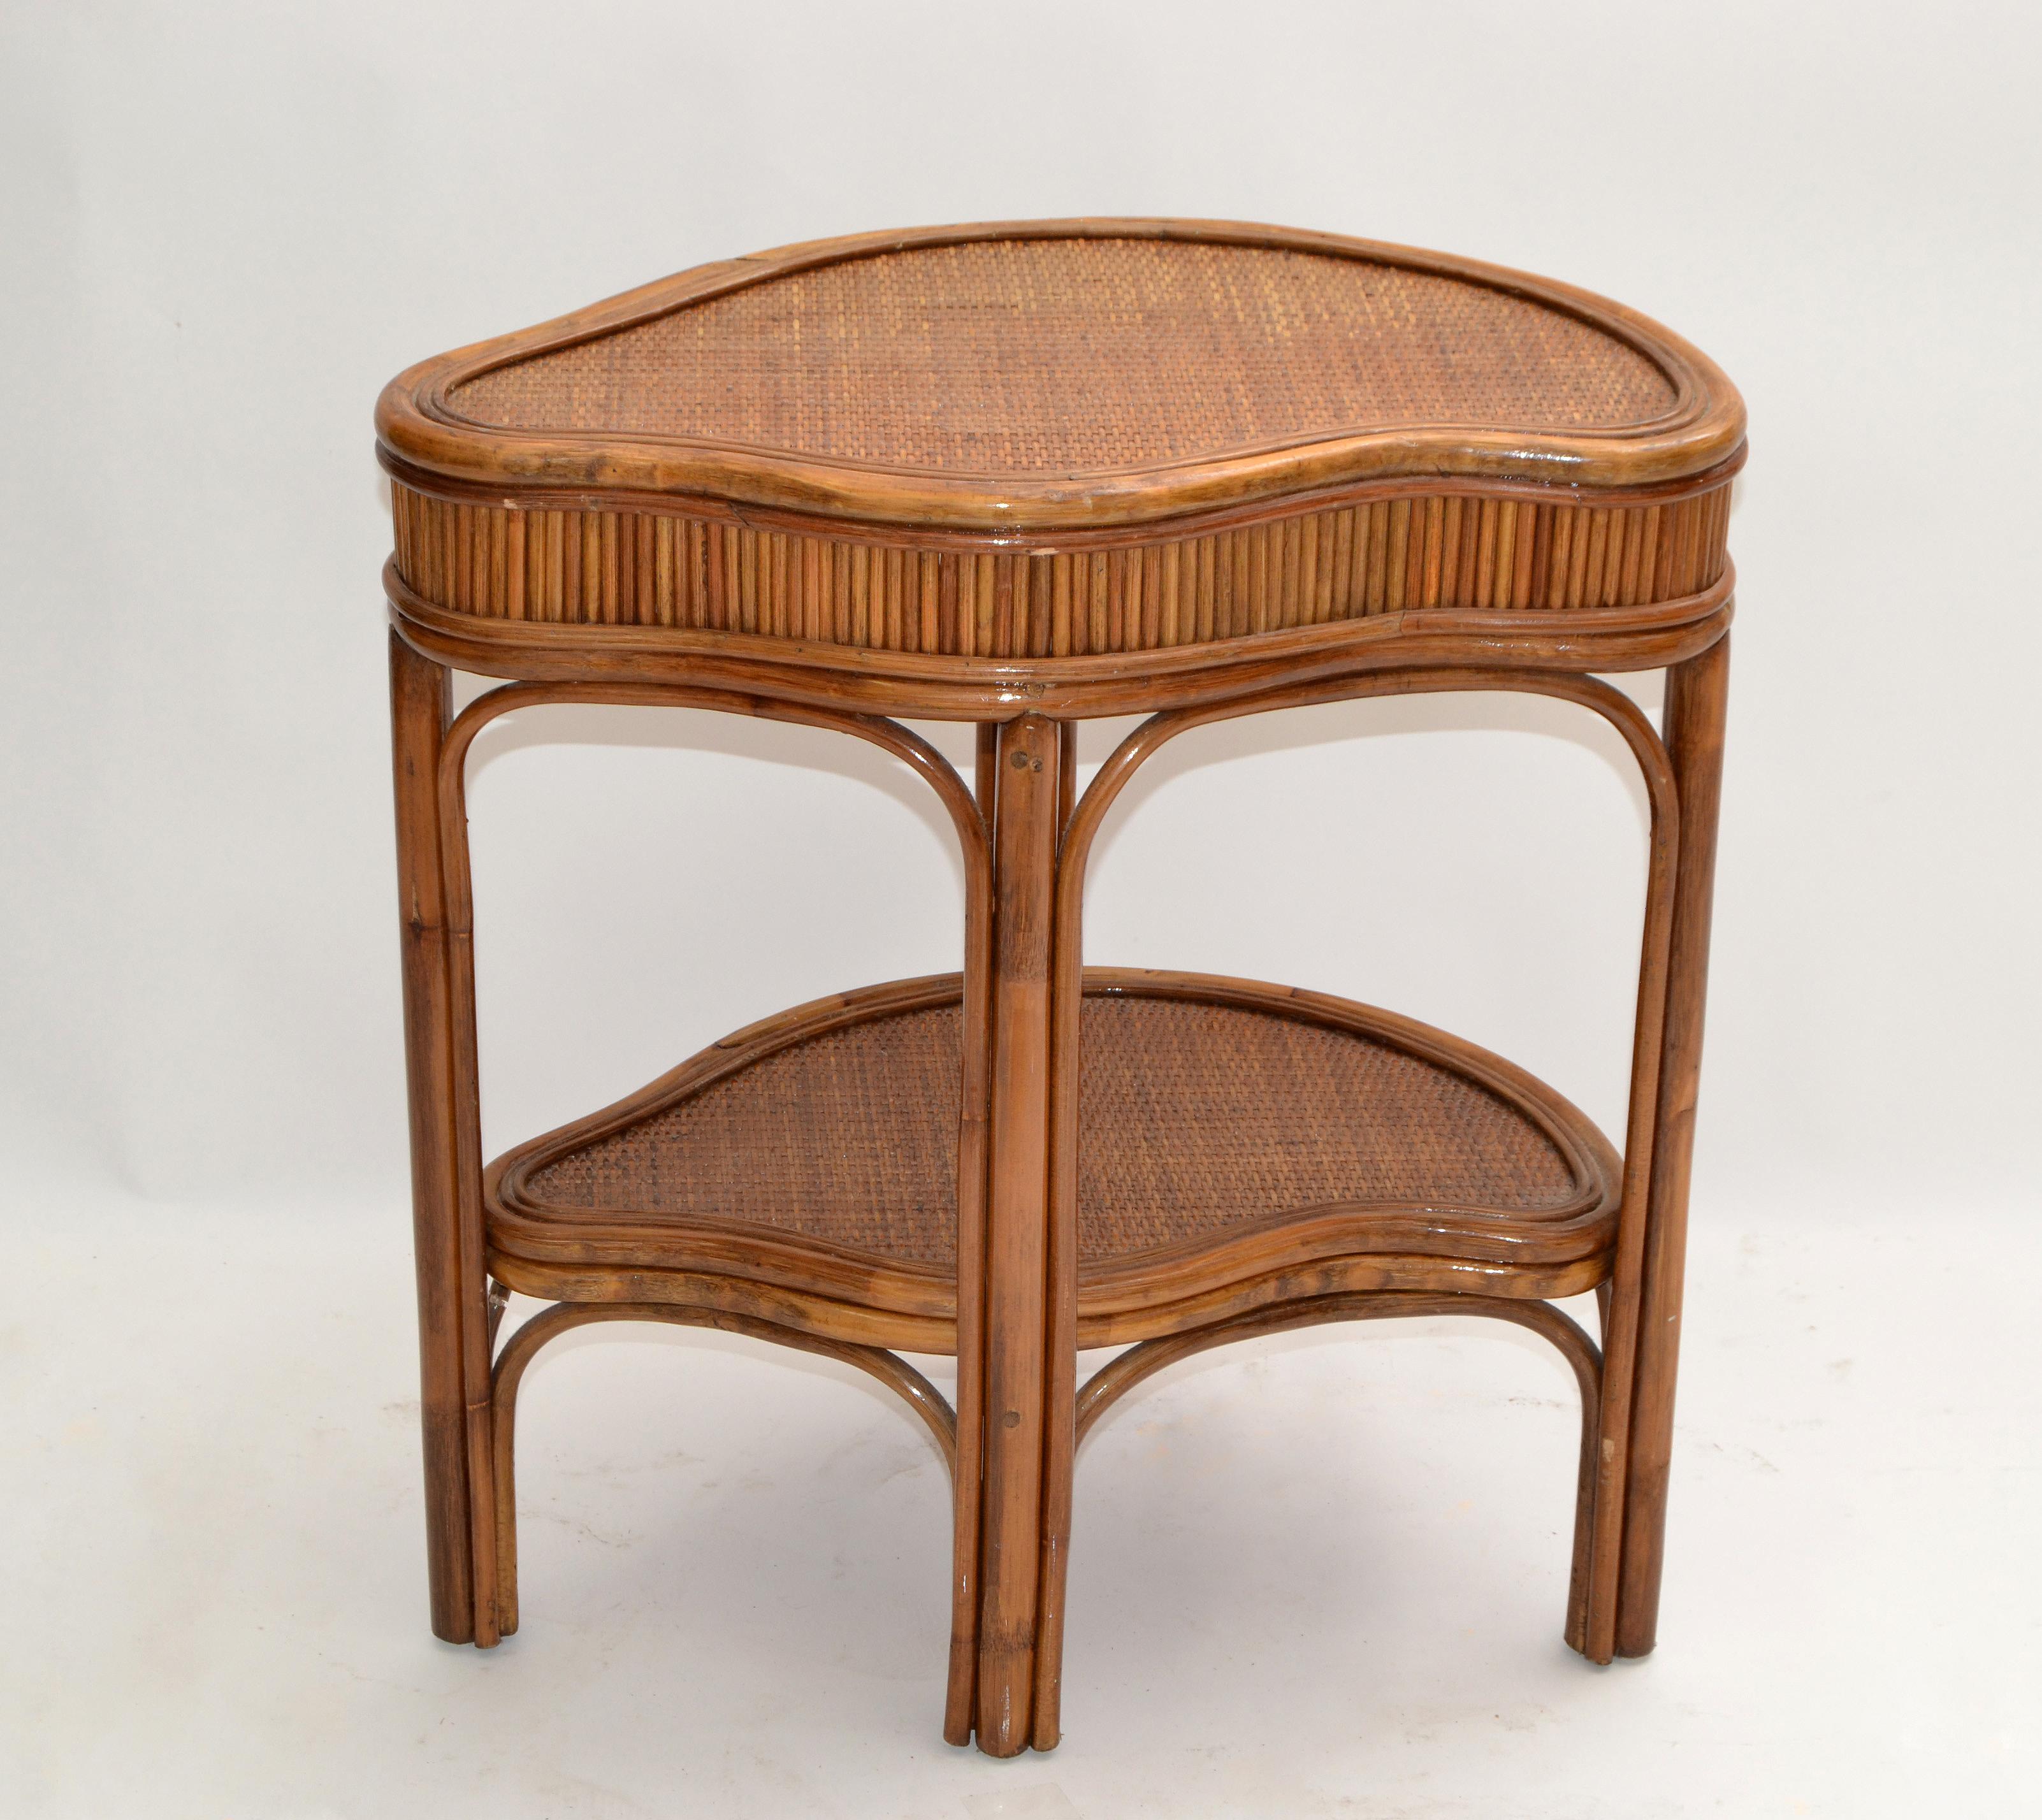 Chinoiserie Bamboo & Rattan Handmade Two-Tier Side, End Table Asian Modern 70s For Sale 4